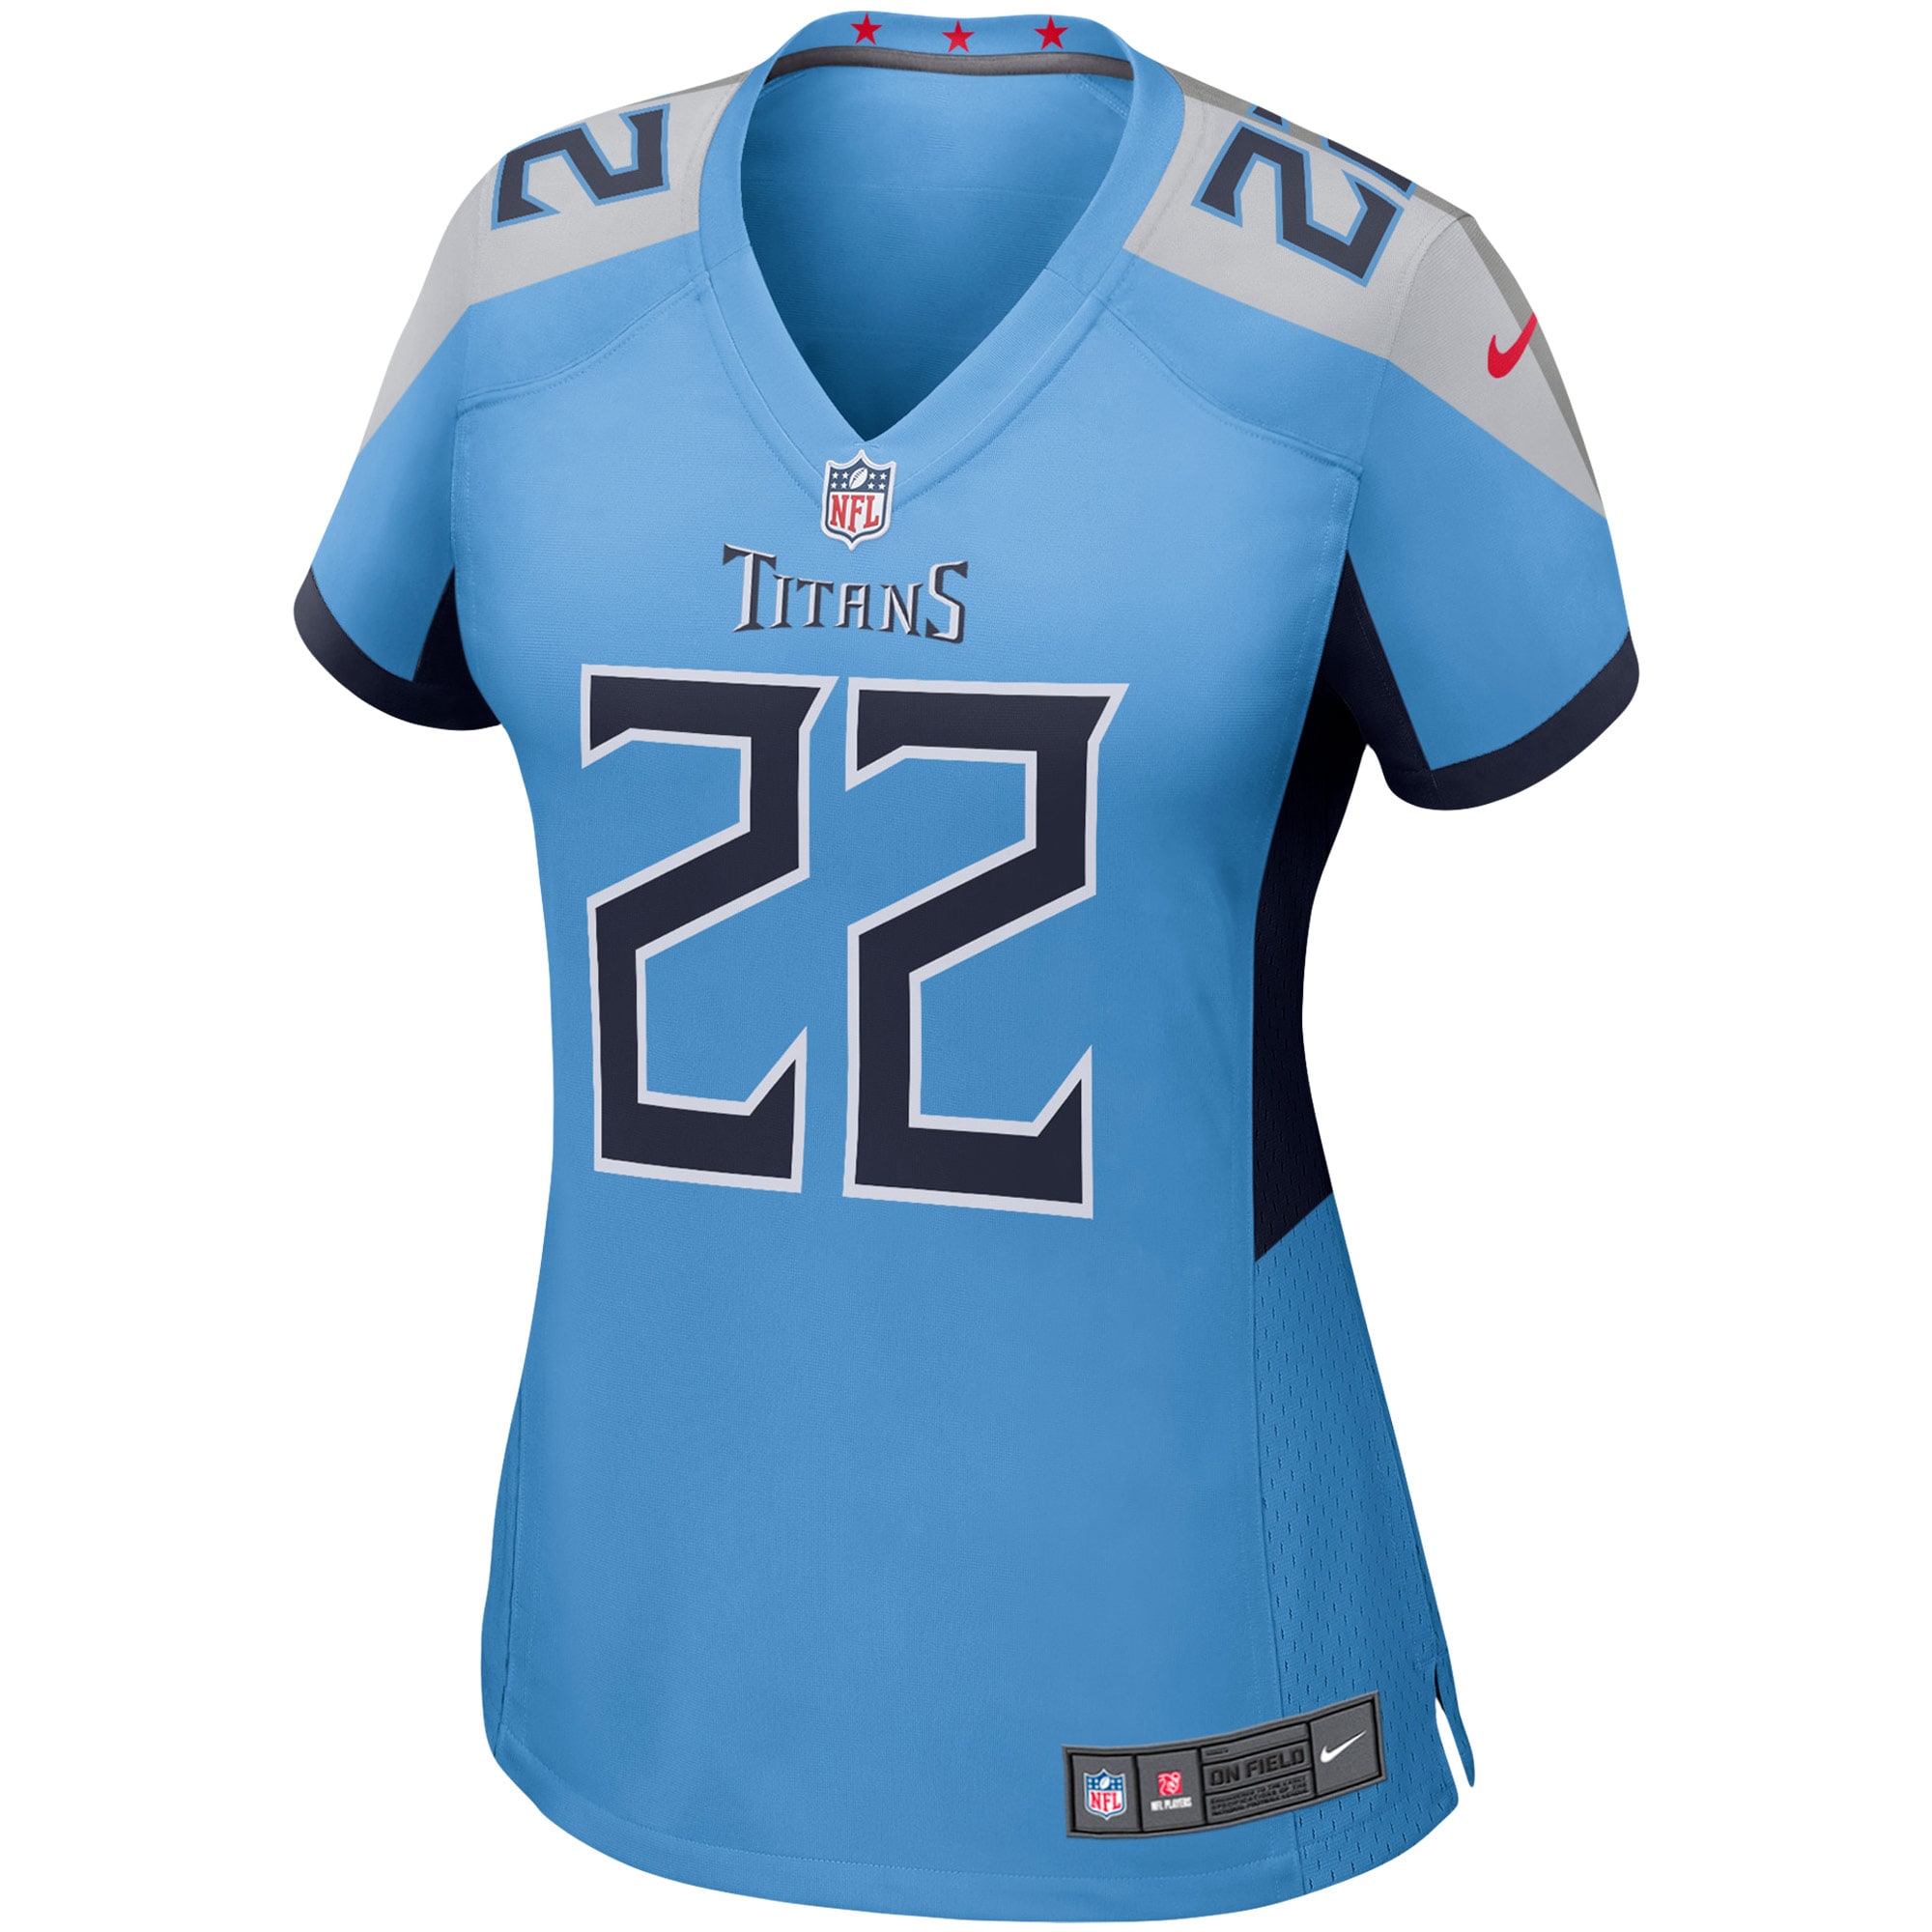 Women's Nike Derrick Henry Light Blue Tennessee Titans Game Jersey - image 2 of 3